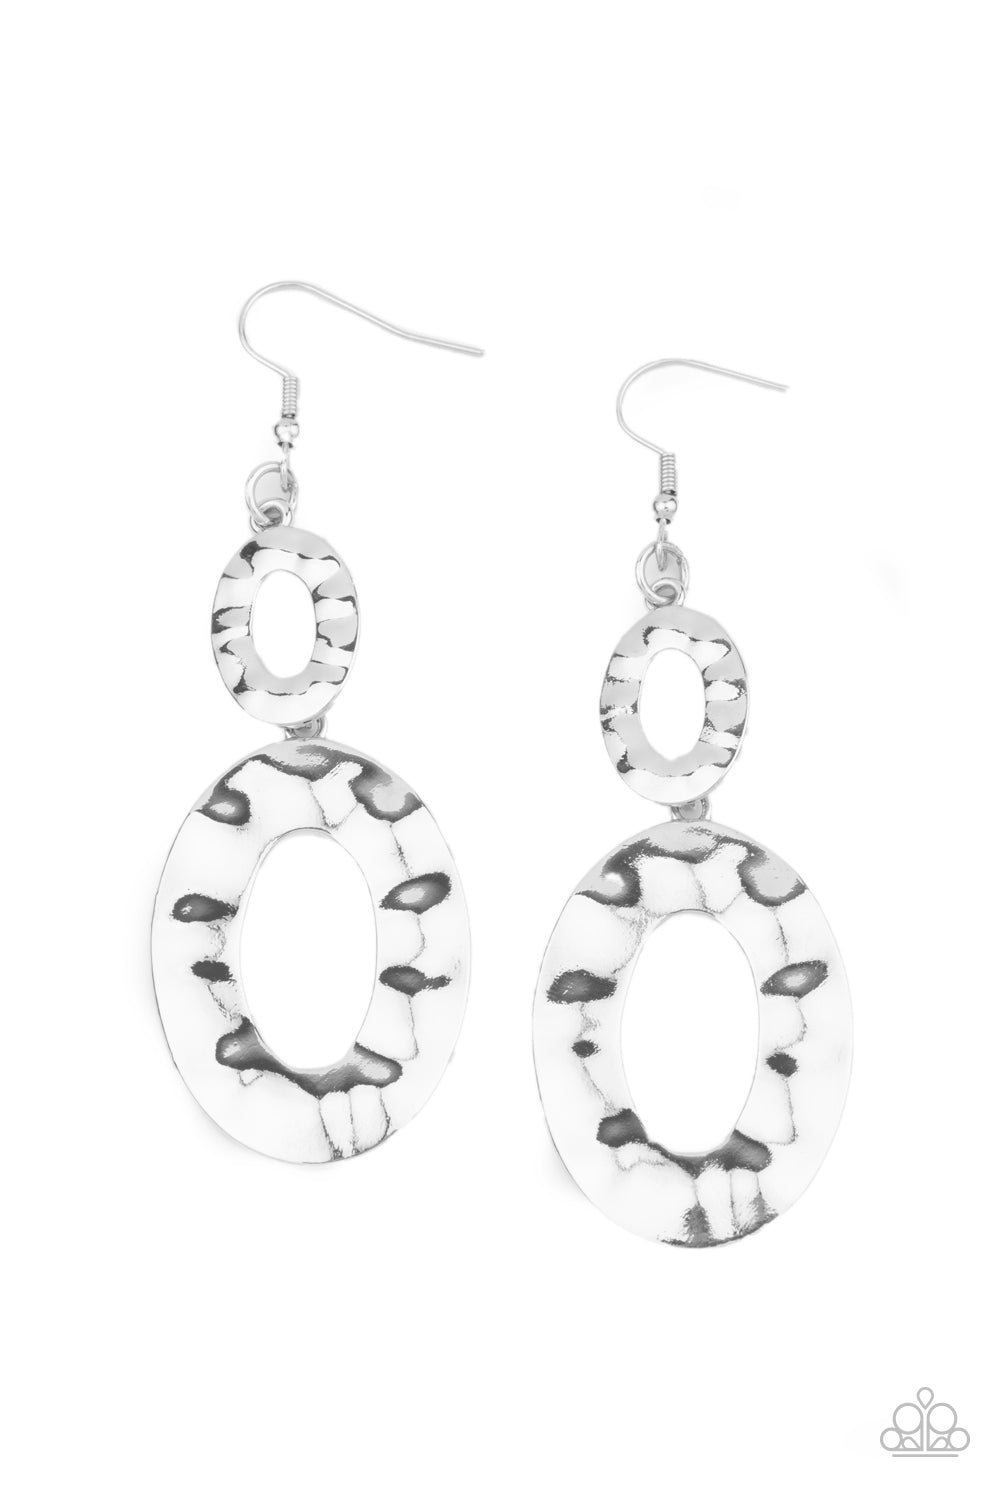 Bring On The Basics - Silver Paparazzi Earrings